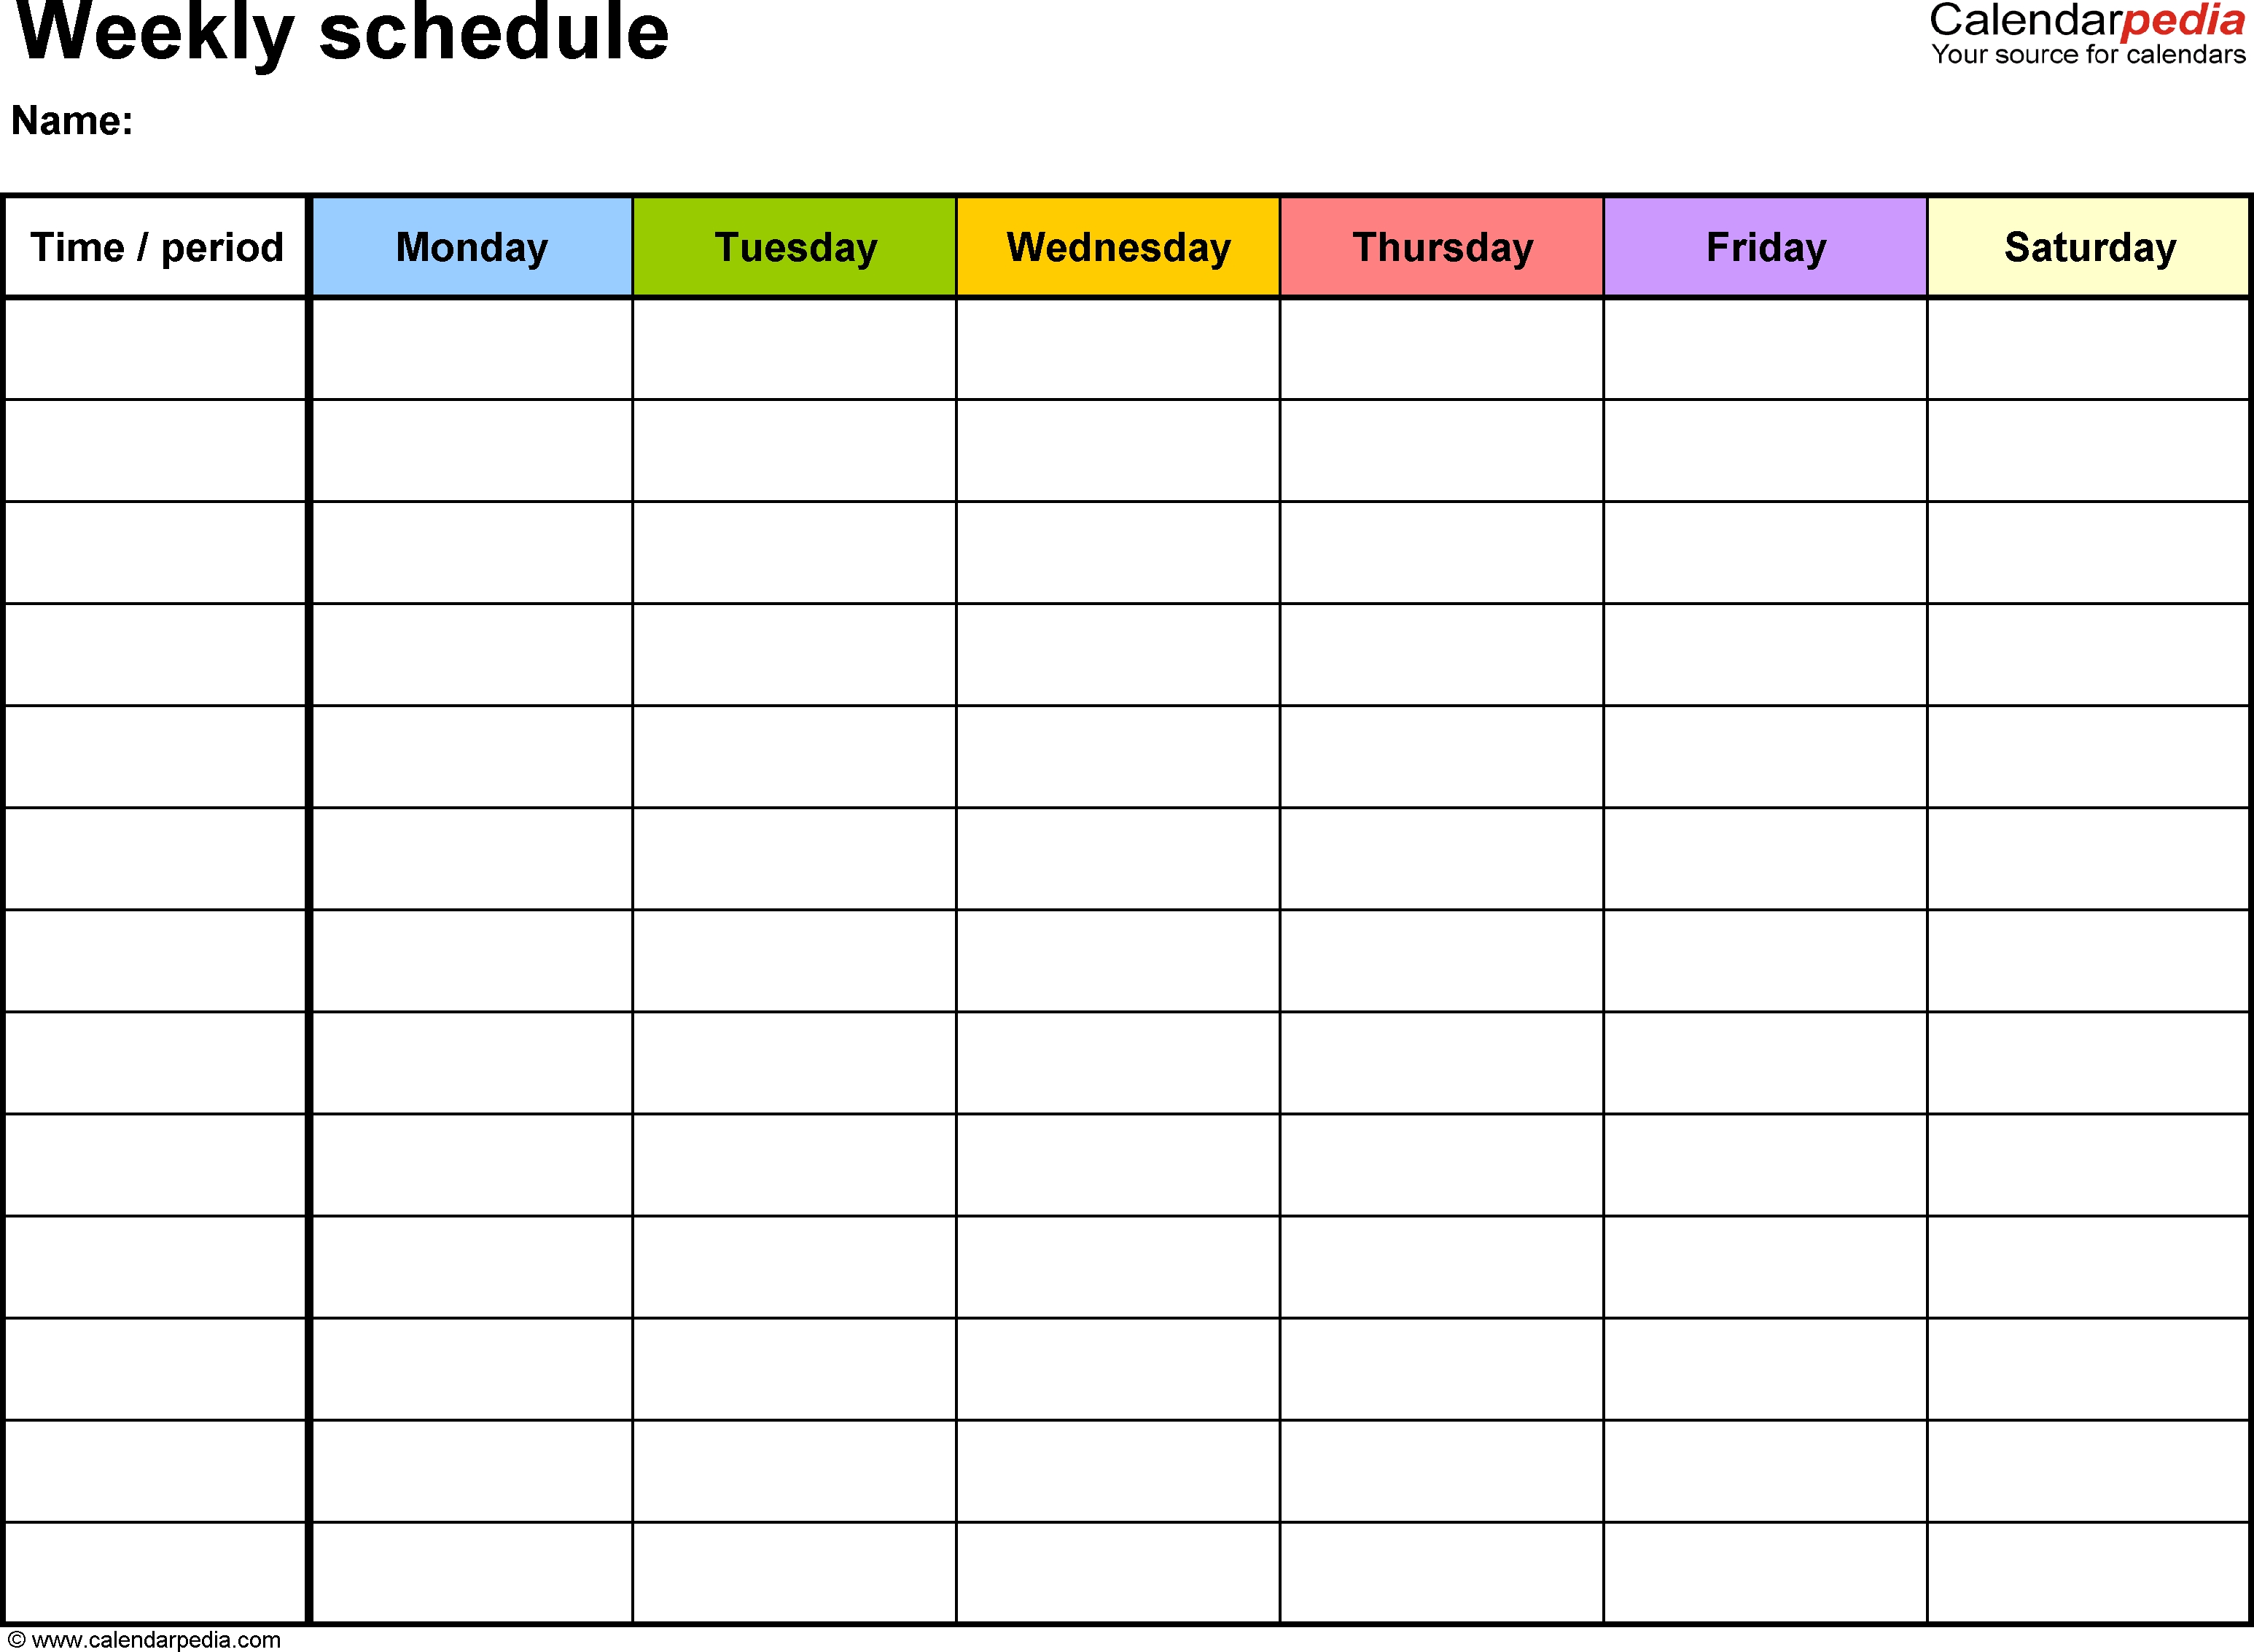 Free Weekly Schedule Templates For Word - 18 Templates-Monday To Friday Calendar Template